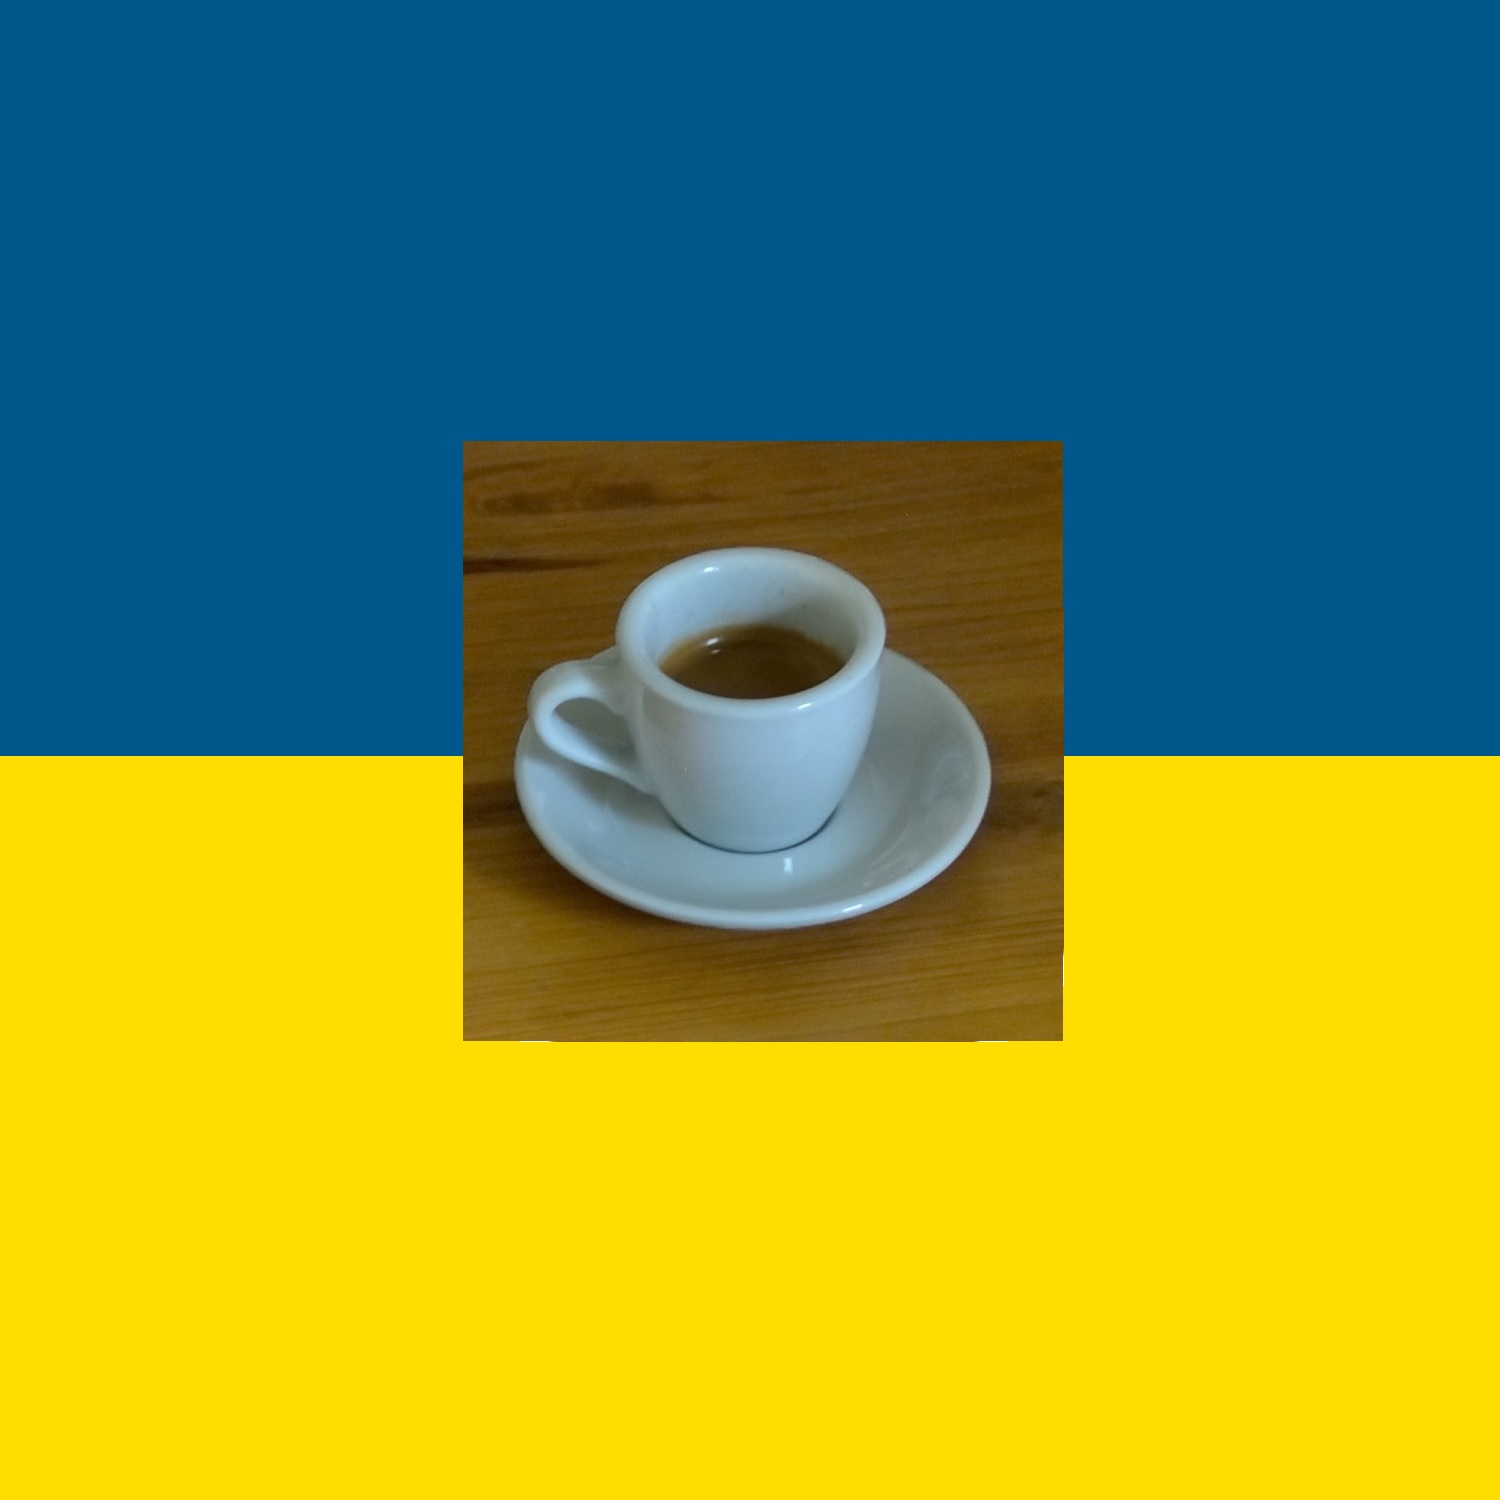 The familiar Coffee Spot cup, superimposed on the flag of Ukraine.